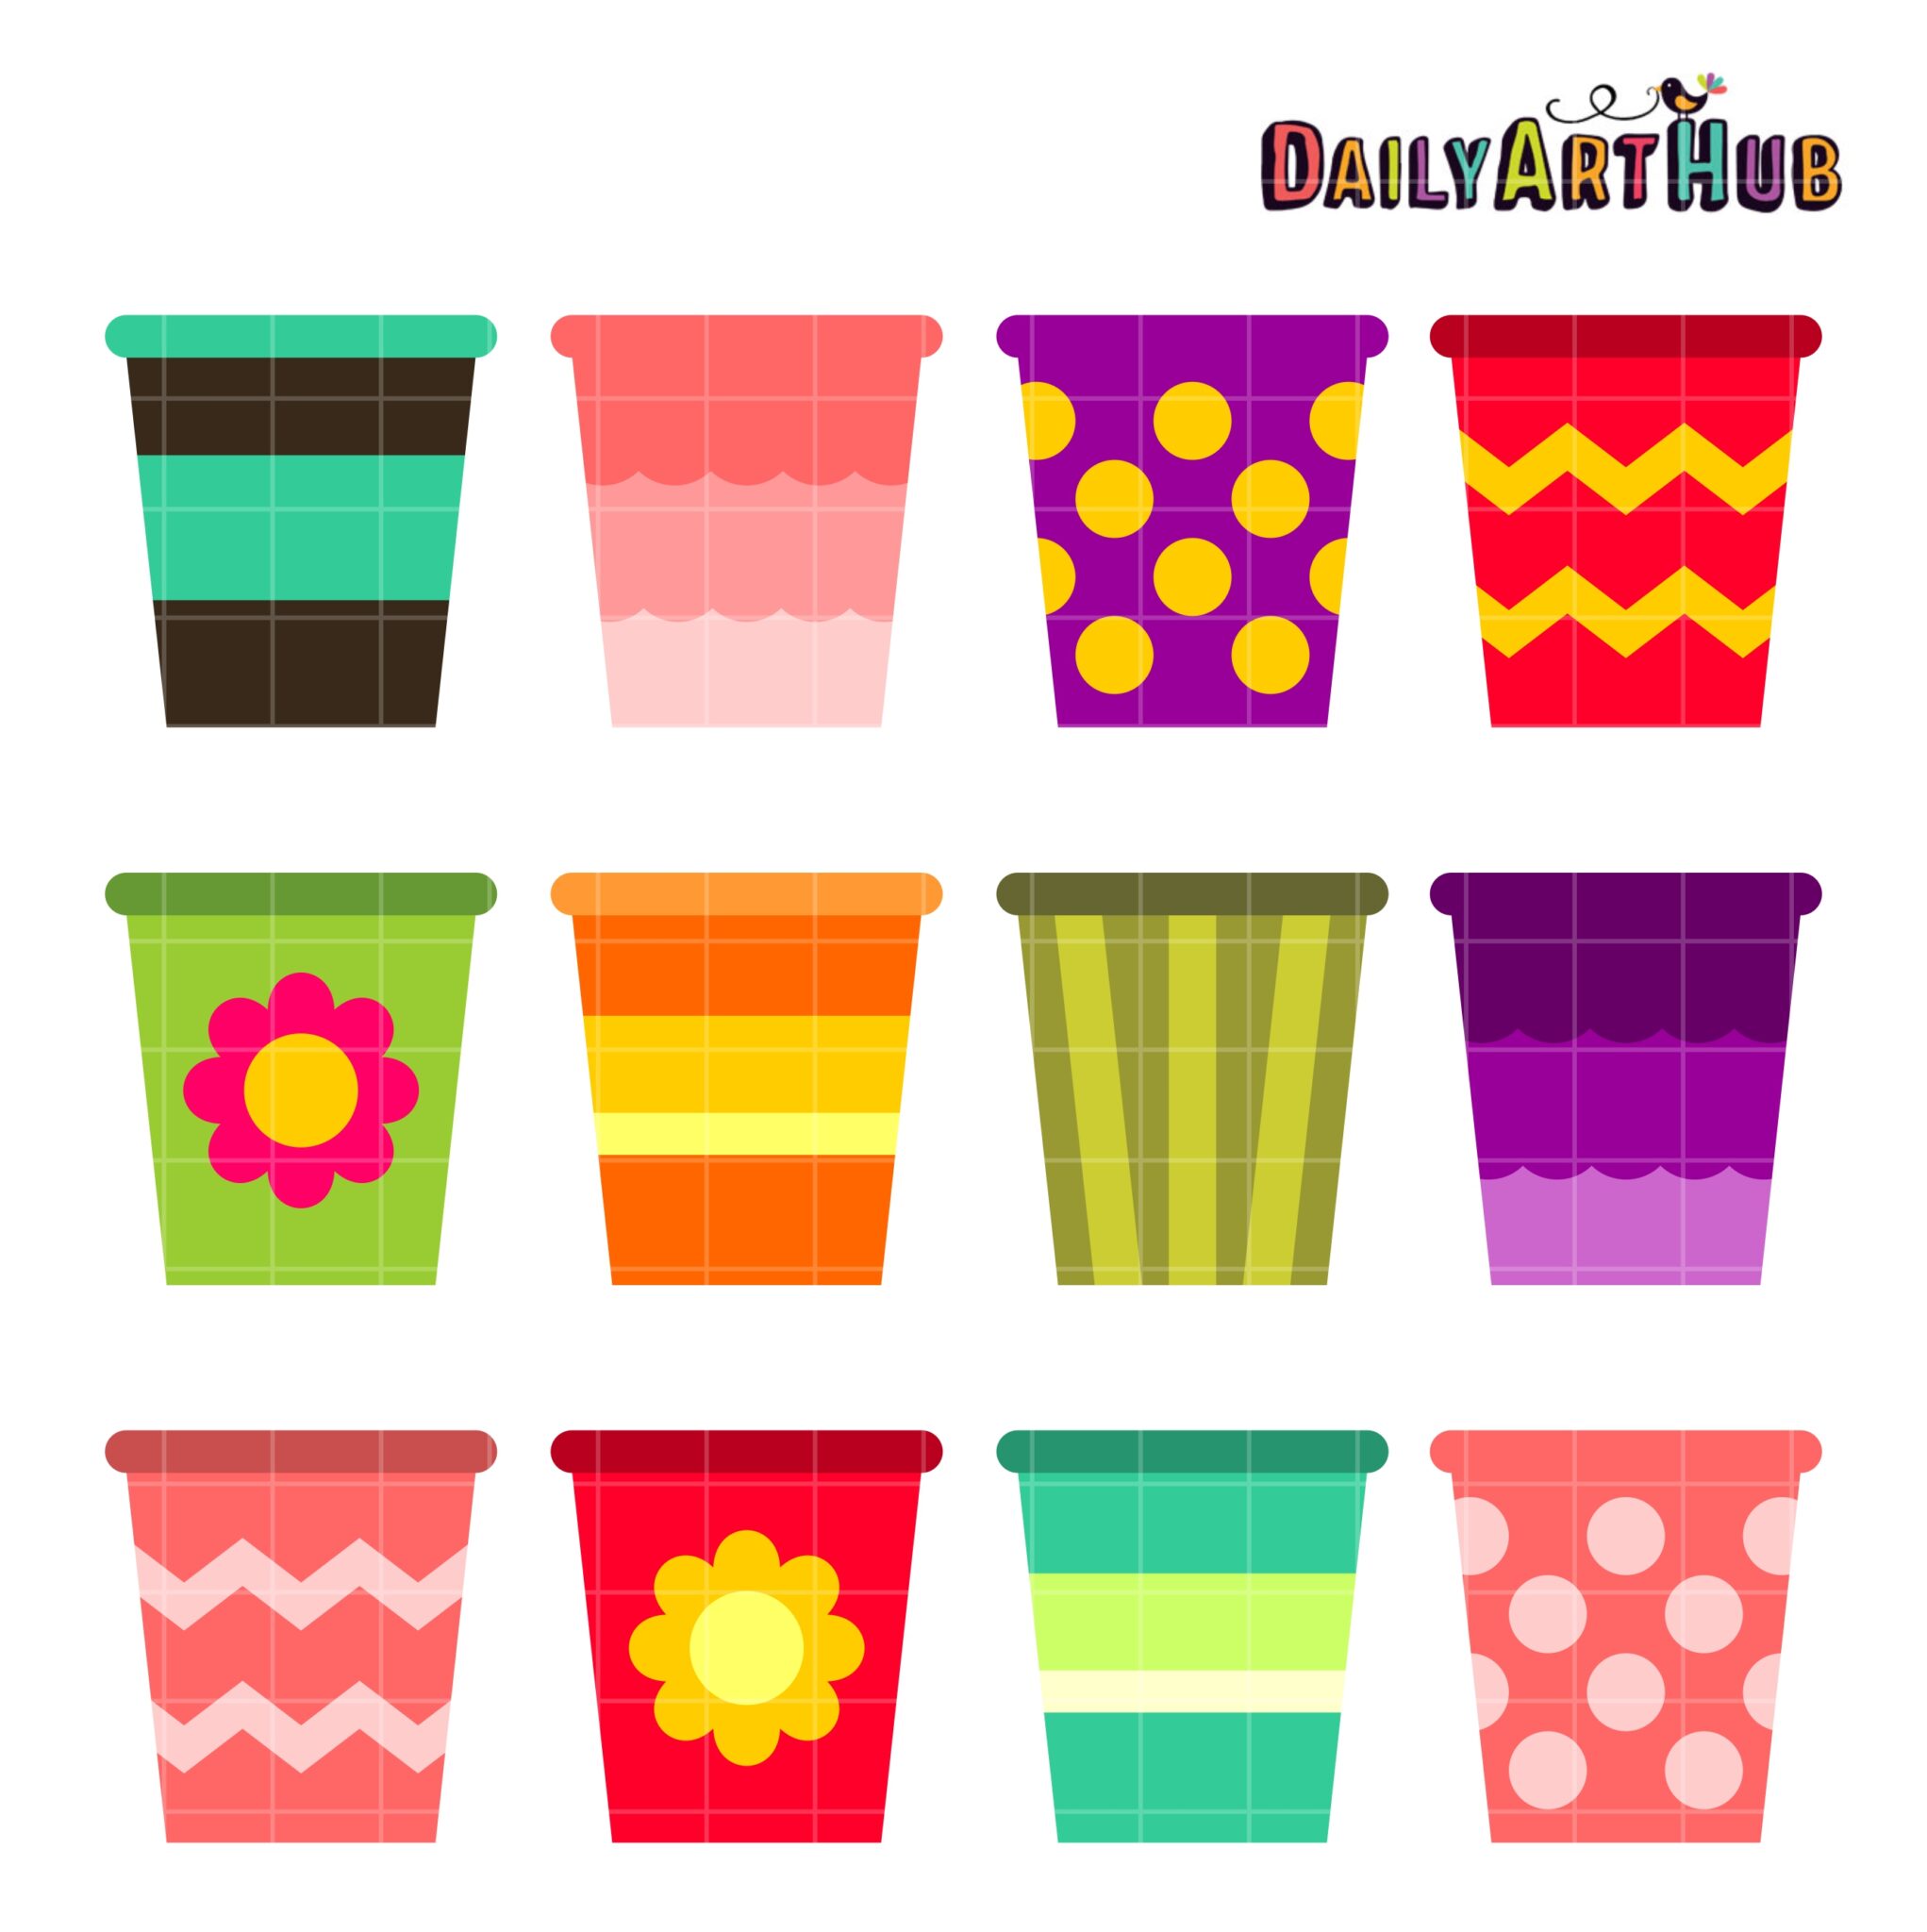 https://www.dailyarthub.com/wp-content/uploads/2015/09/Colorful-Cups-scaled.jpg